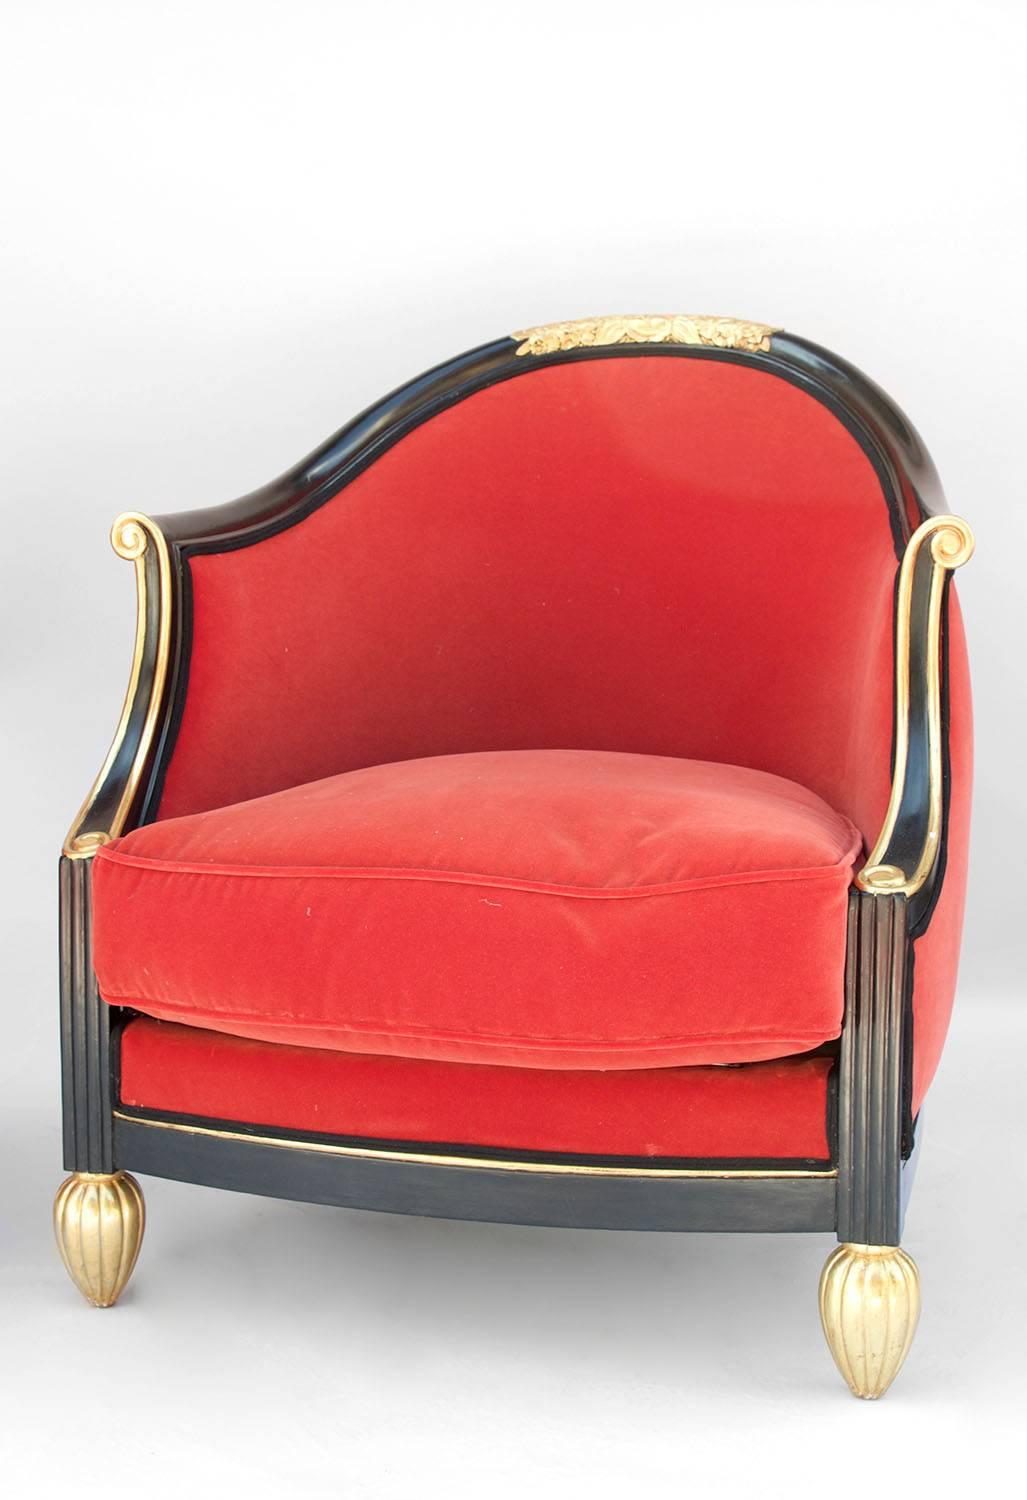 Pair of black lacquered and gilt highlights armchairs, in the style of Maurice Dufrêne (1876-1955).
They are standing on two front grooved ogive legs and two small back saber legs.
Backseat framed with a round moulding and adorned with vegetal and